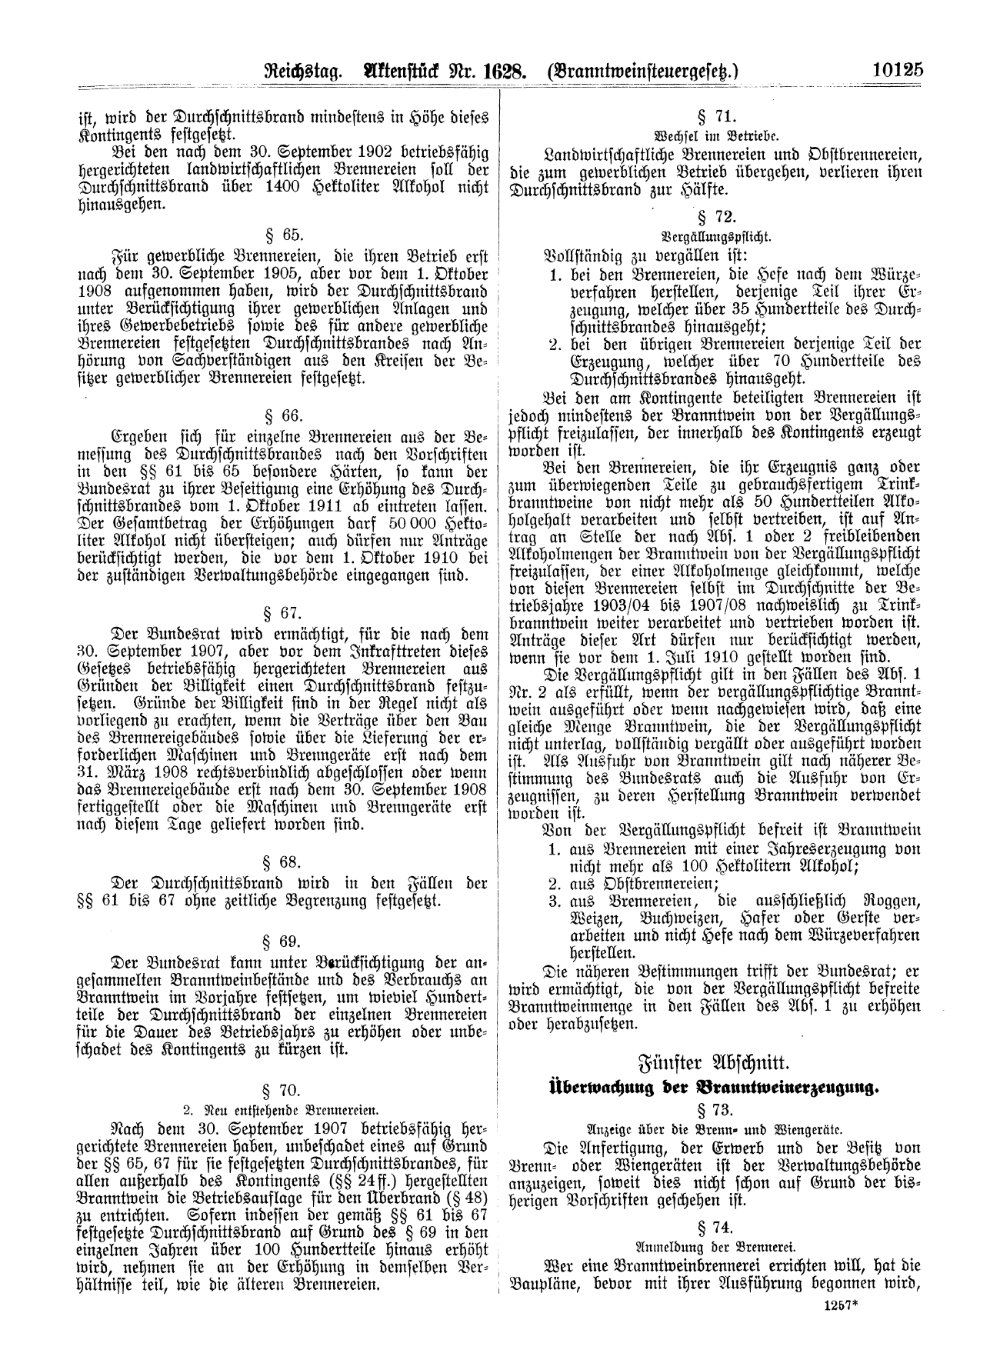 Scan of page 10125